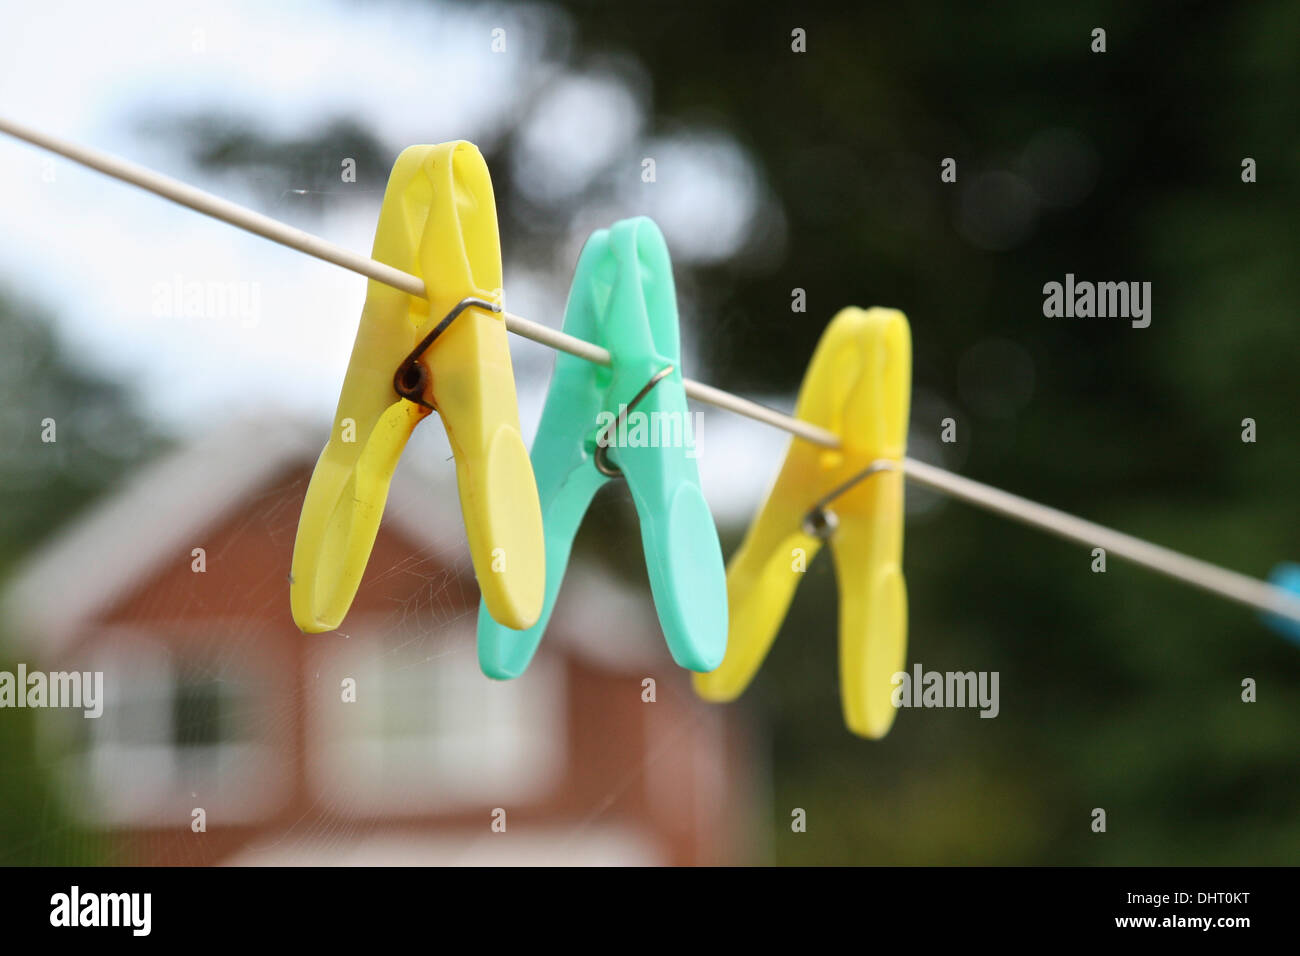 Plastic pegs and cobwebs on a washing line against green background. Stock Photo